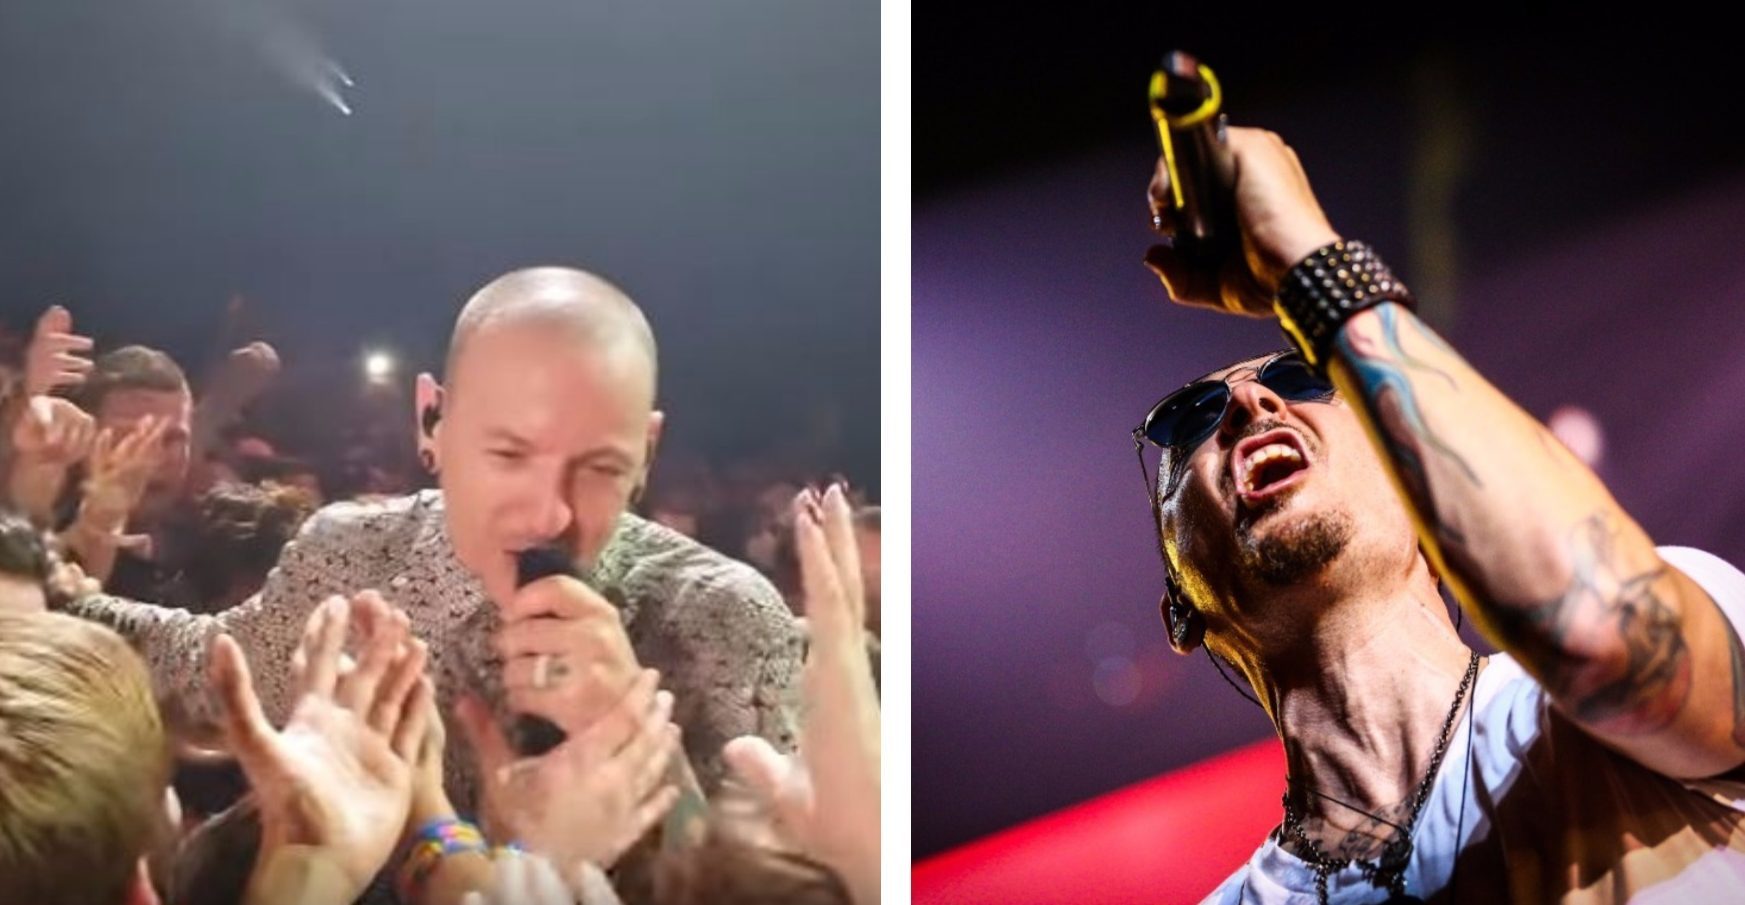 Left: Chester Bennington during what is believed to be his last Linkin Park performance.